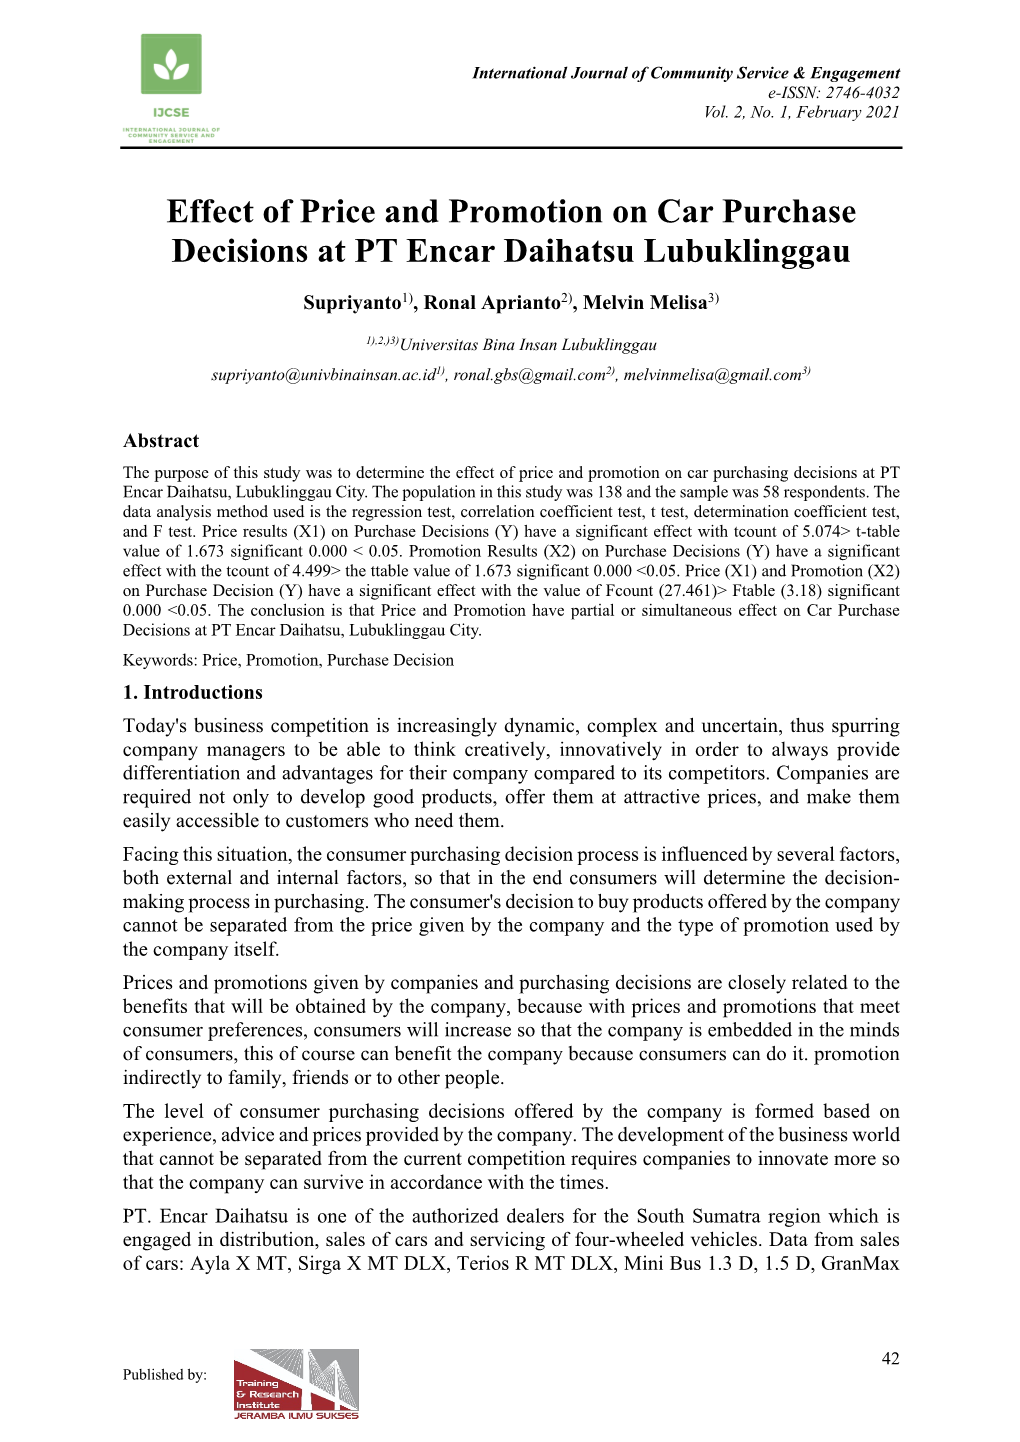 Effect of Price and Promotion on Car Purchase Decisions at PT Encar Daihatsu Lubuklinggau